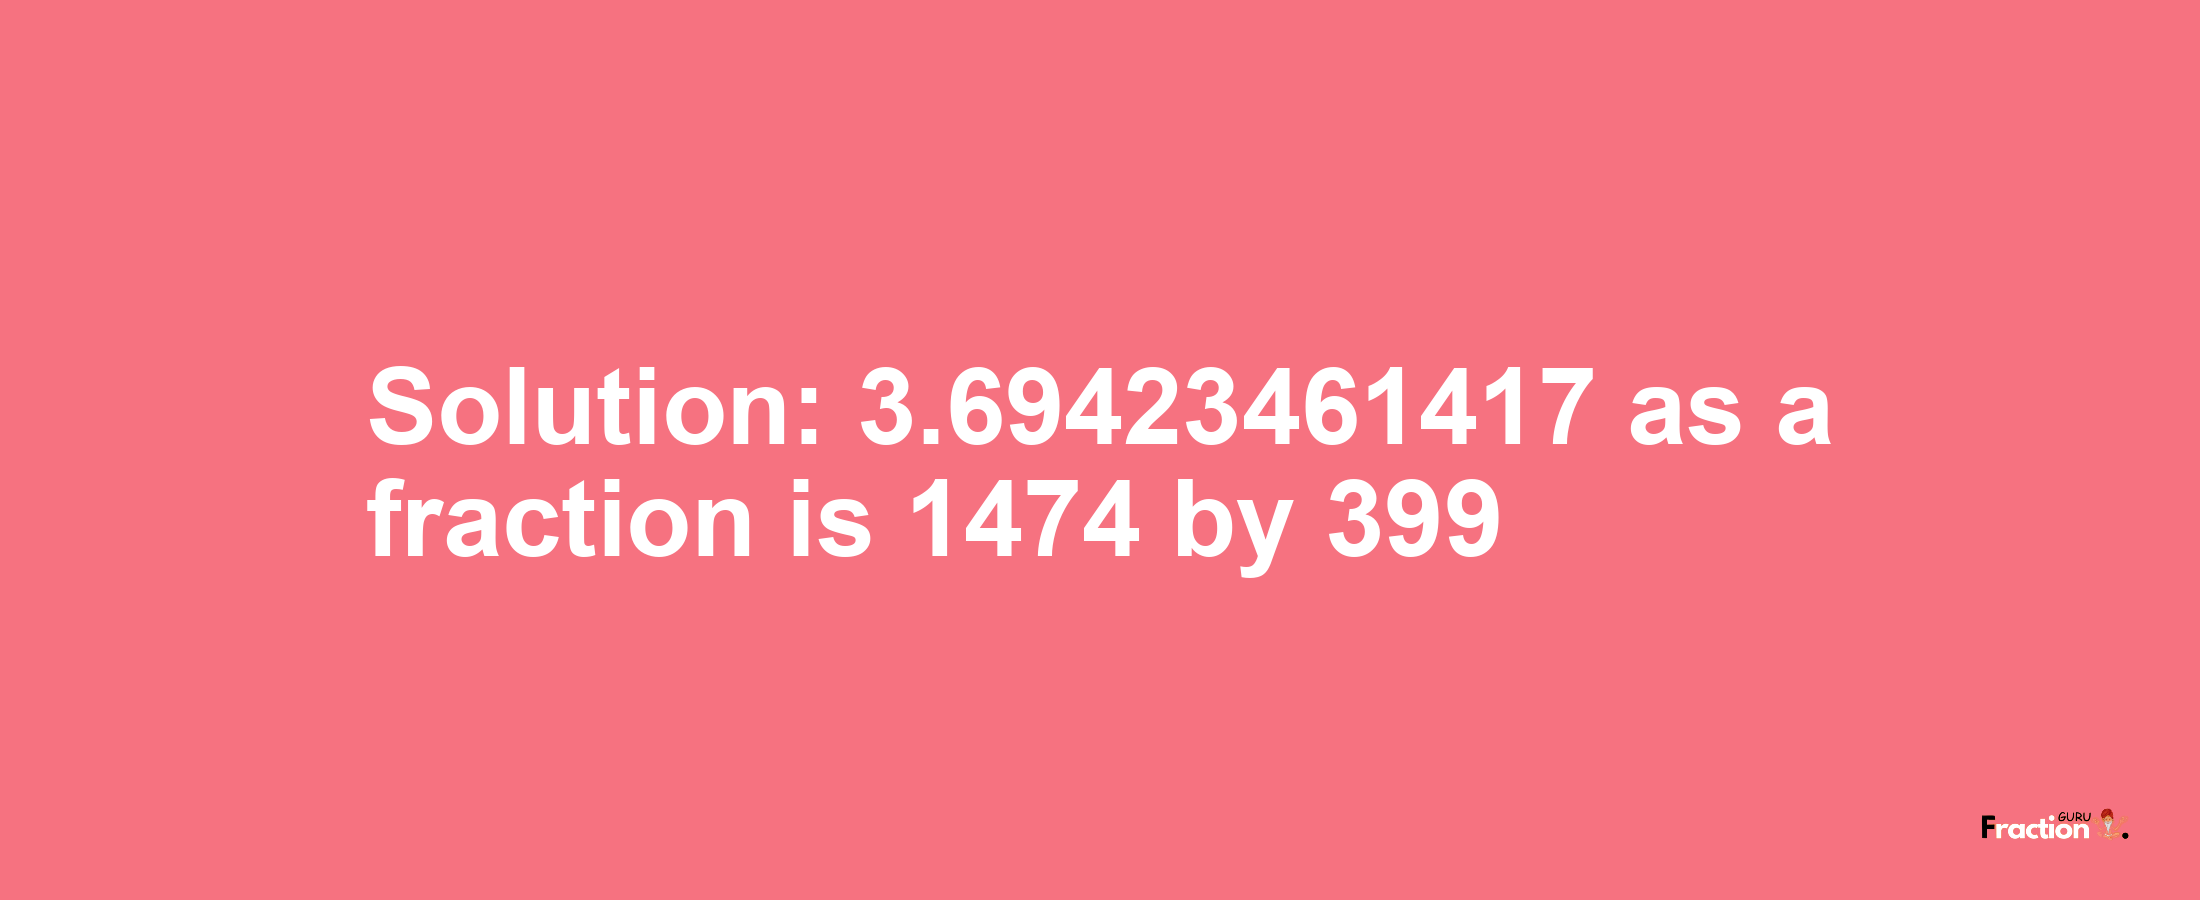 Solution:3.69423461417 as a fraction is 1474/399